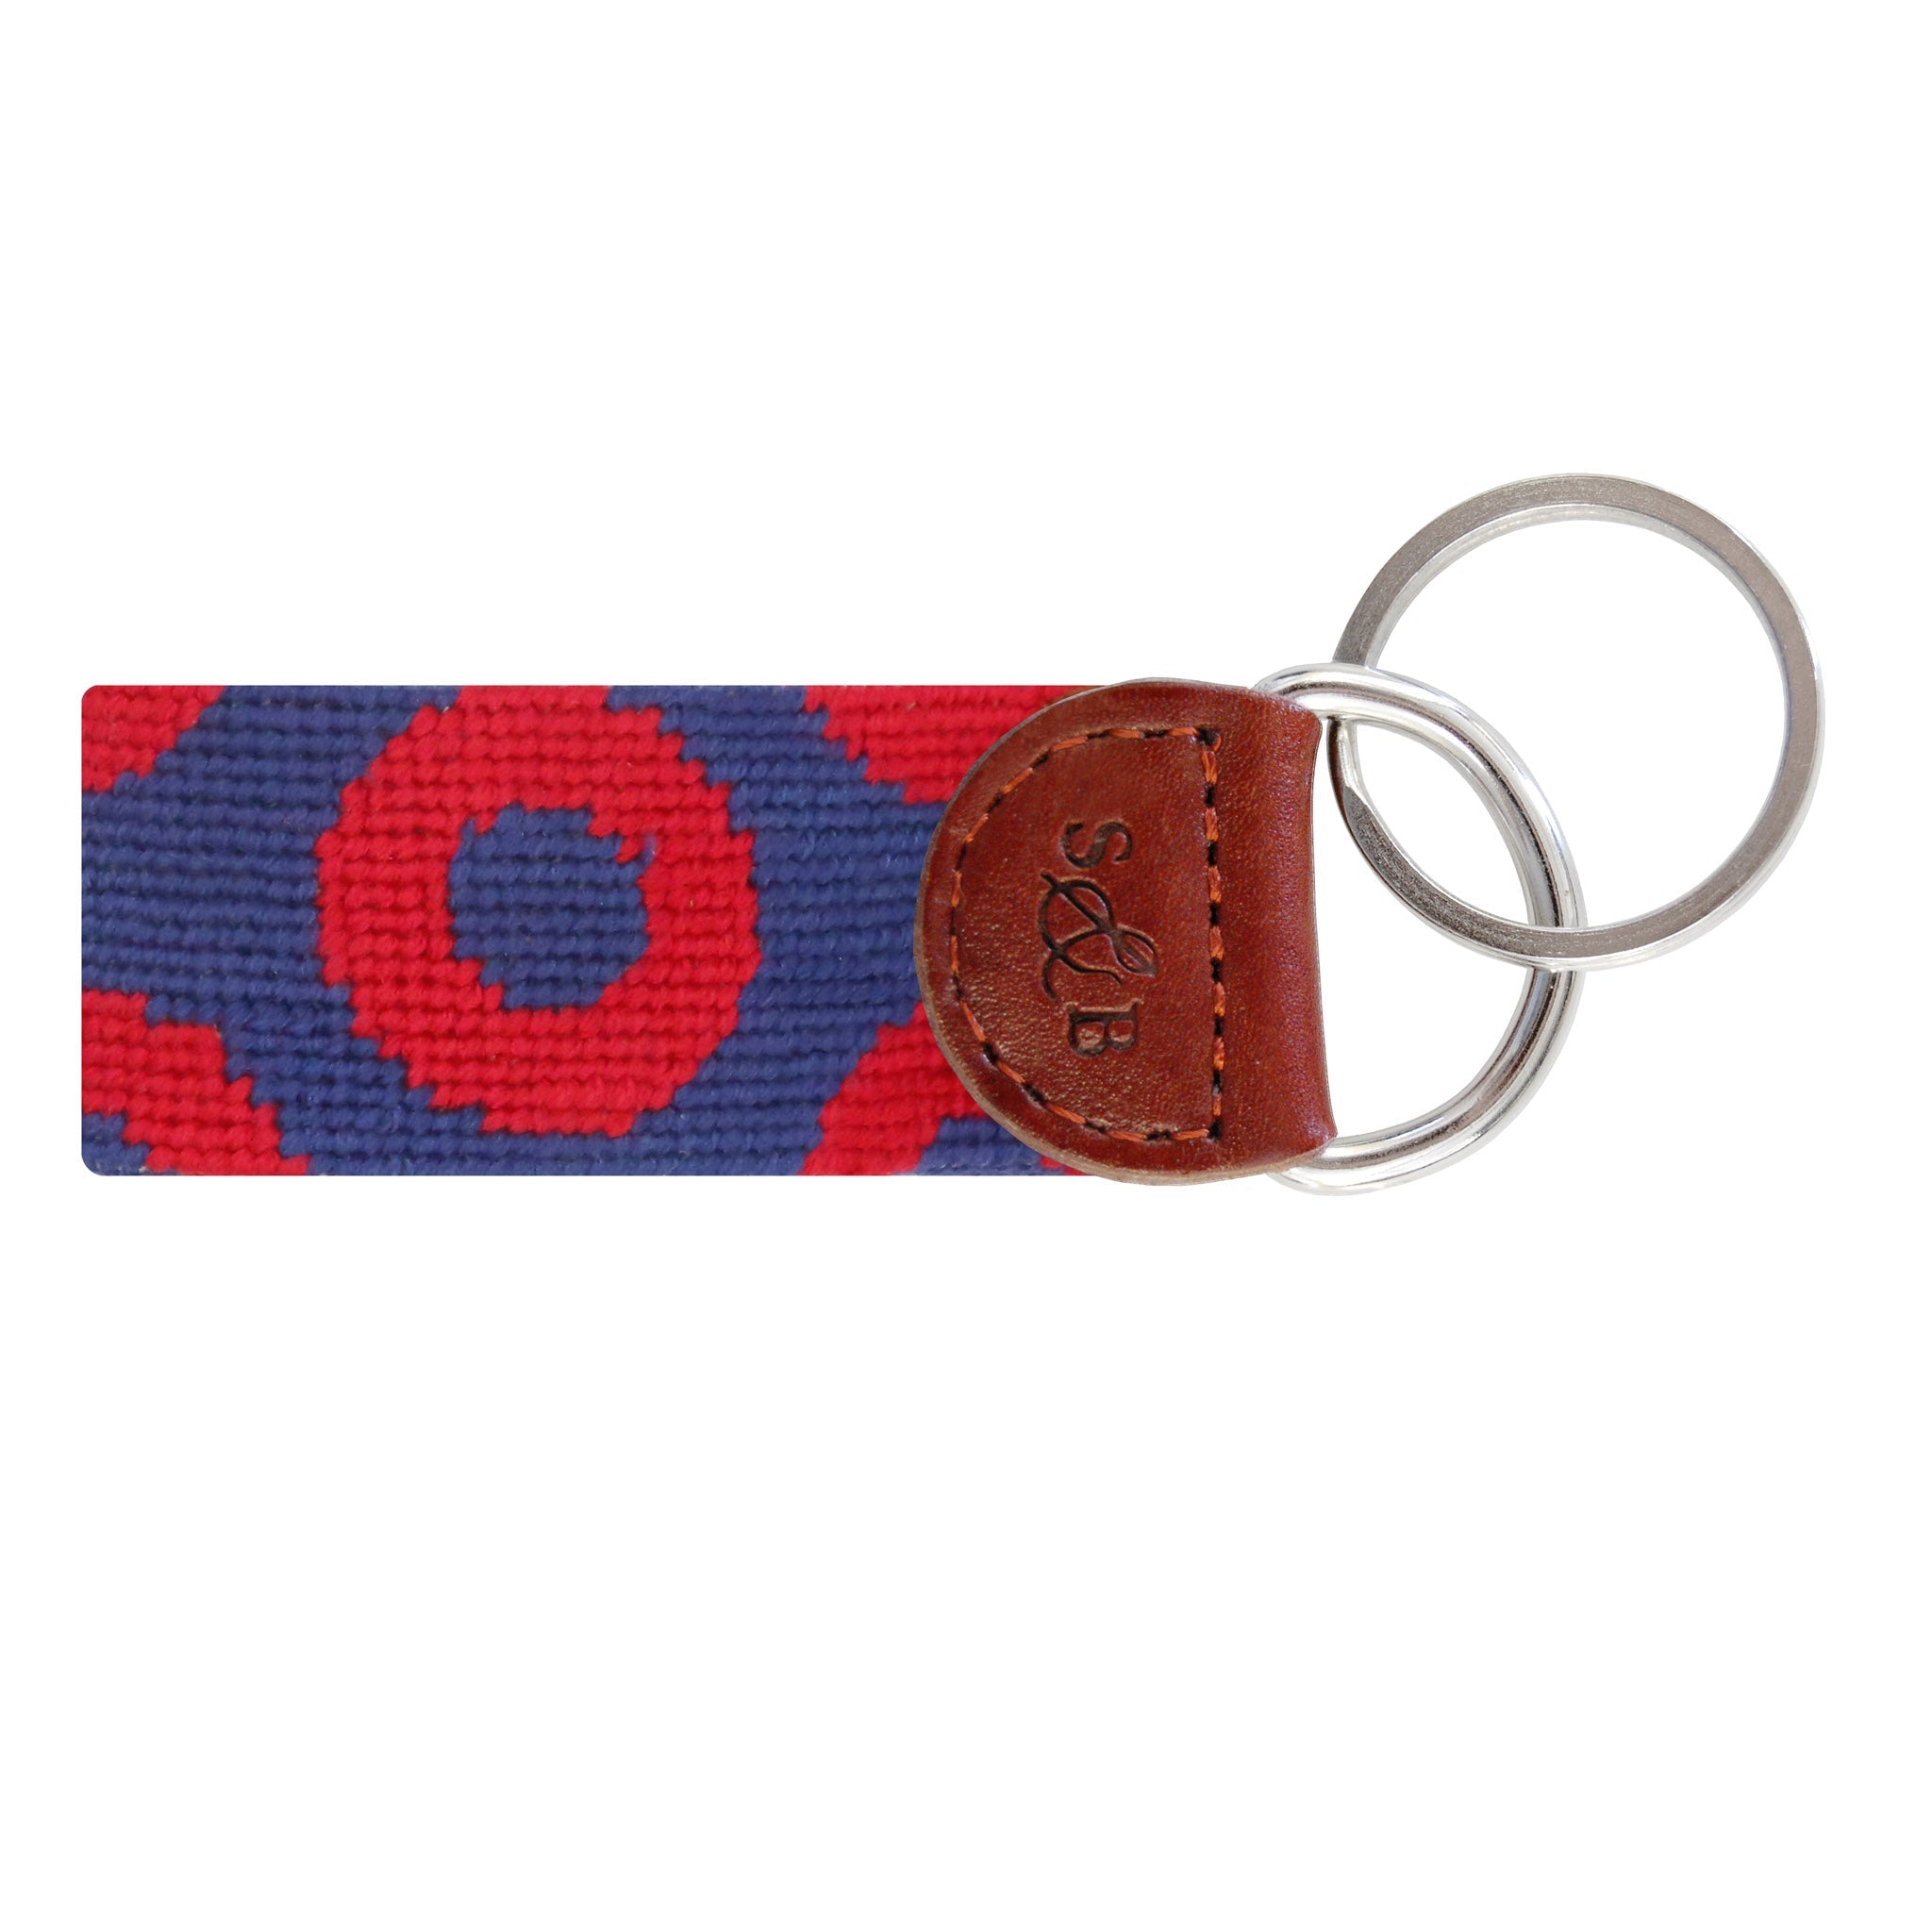 Smathers and Branson The Donut Pattern Needlepoint Key Fob Classic Navy - Red Donuts Back 